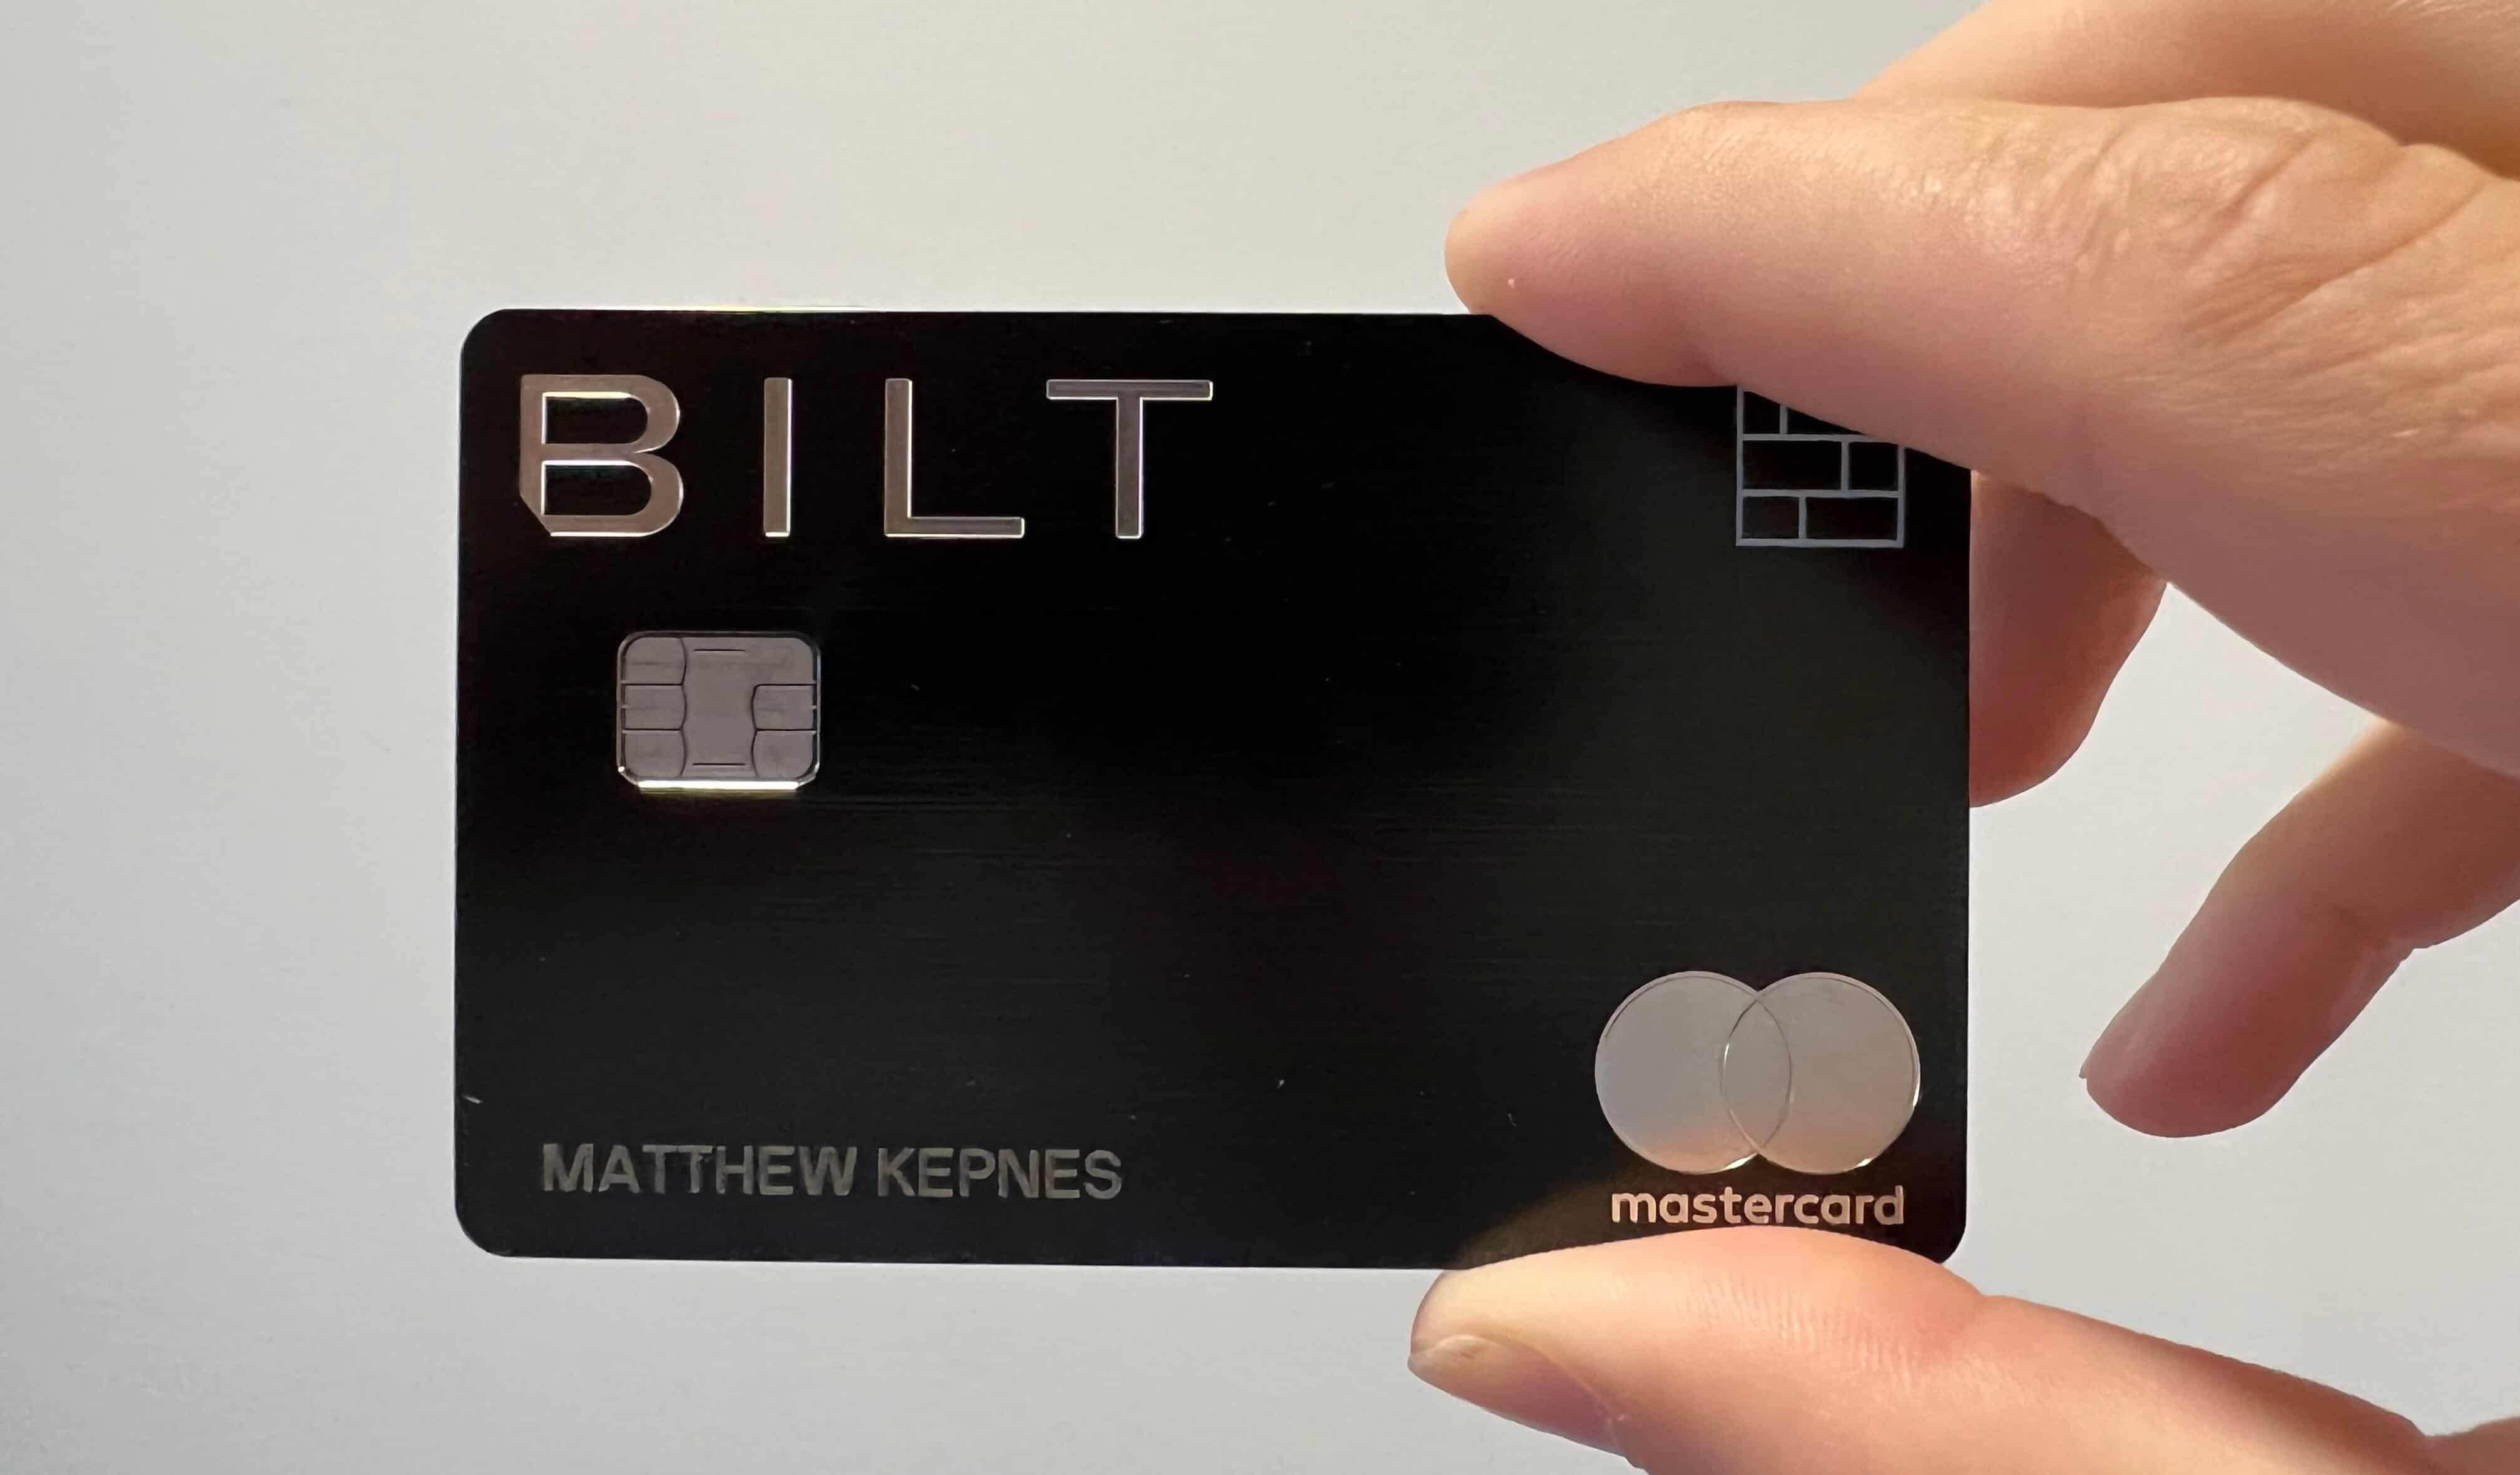 Nomadic Matt's Bilt Mastercard is held up in front of a white wall